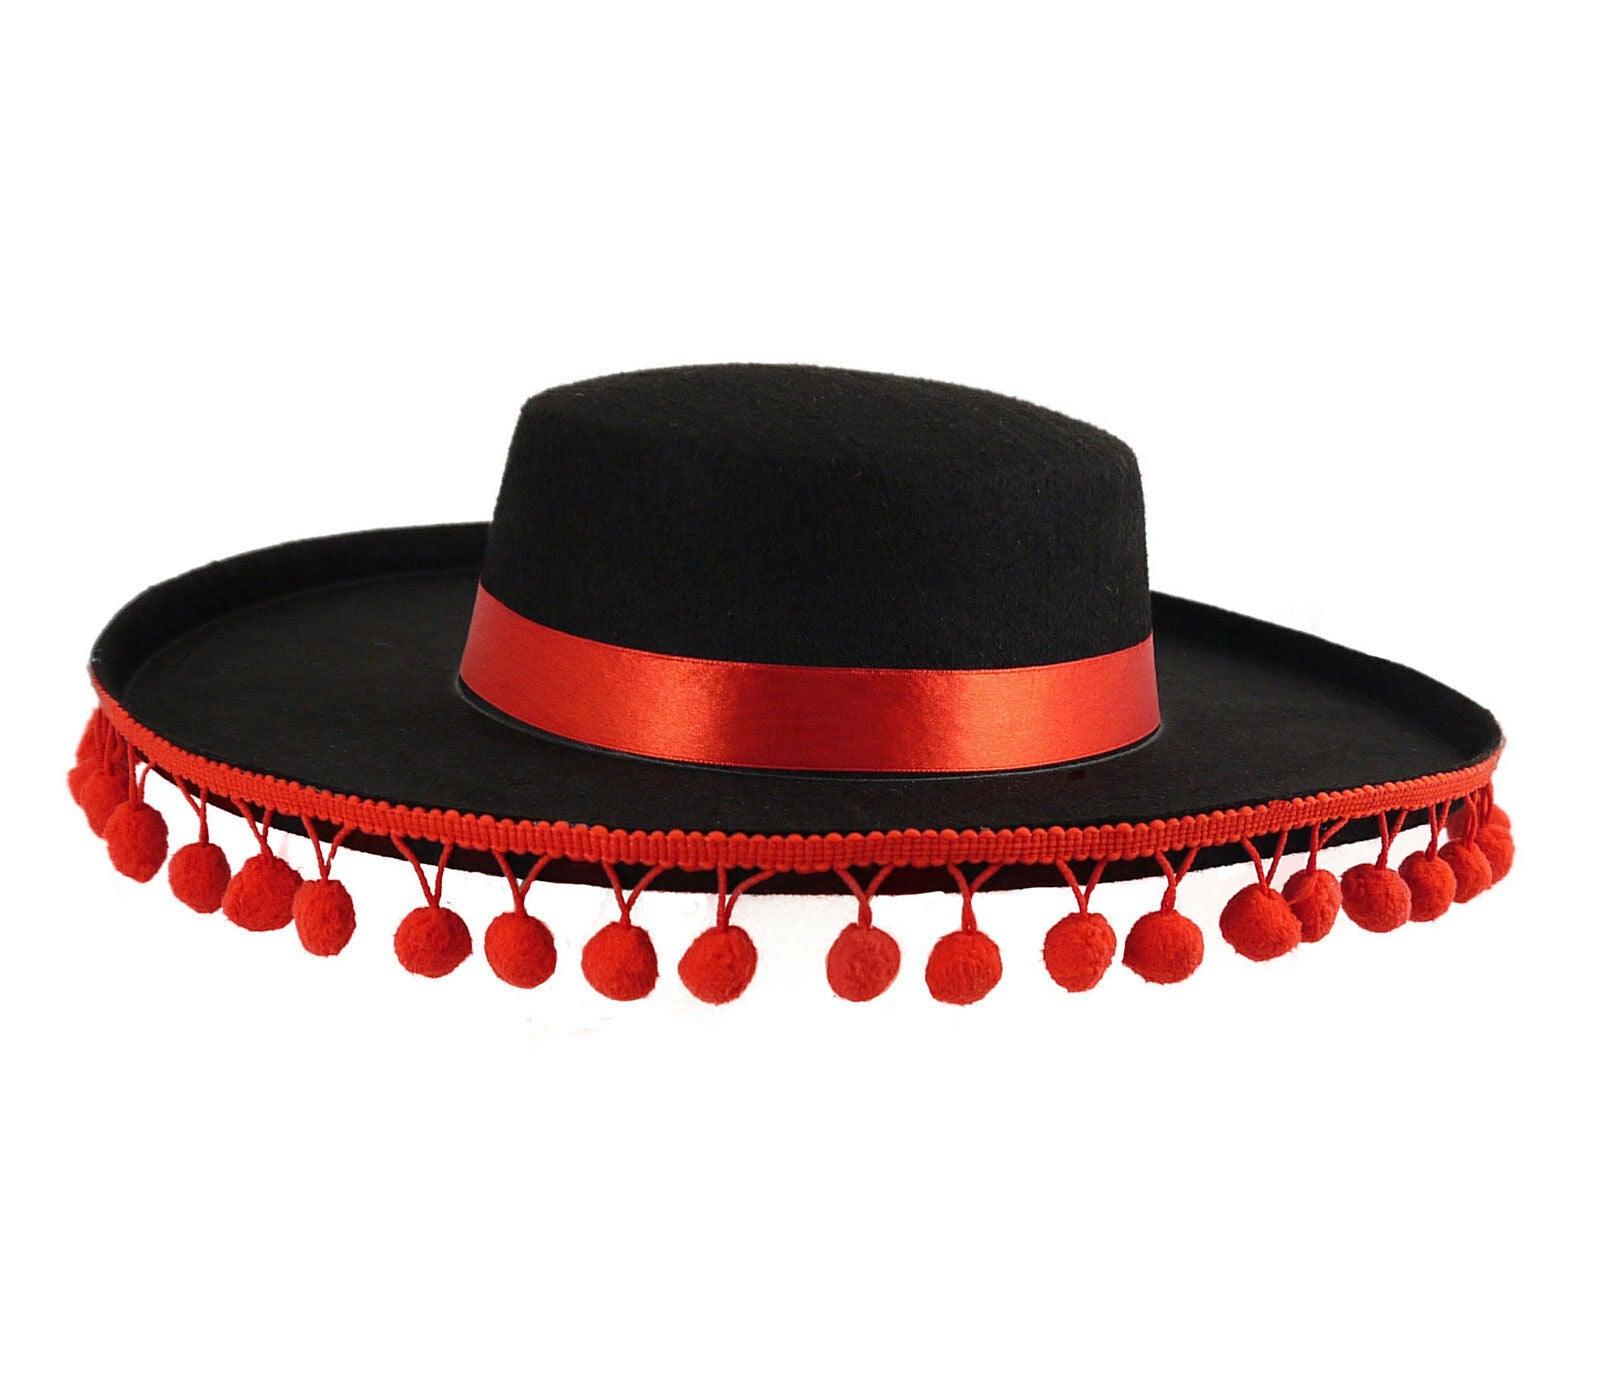 Men Felt Bull Fighter Spanish Hat with Red Bobbles Trim Fancy Outfit - Labreeze